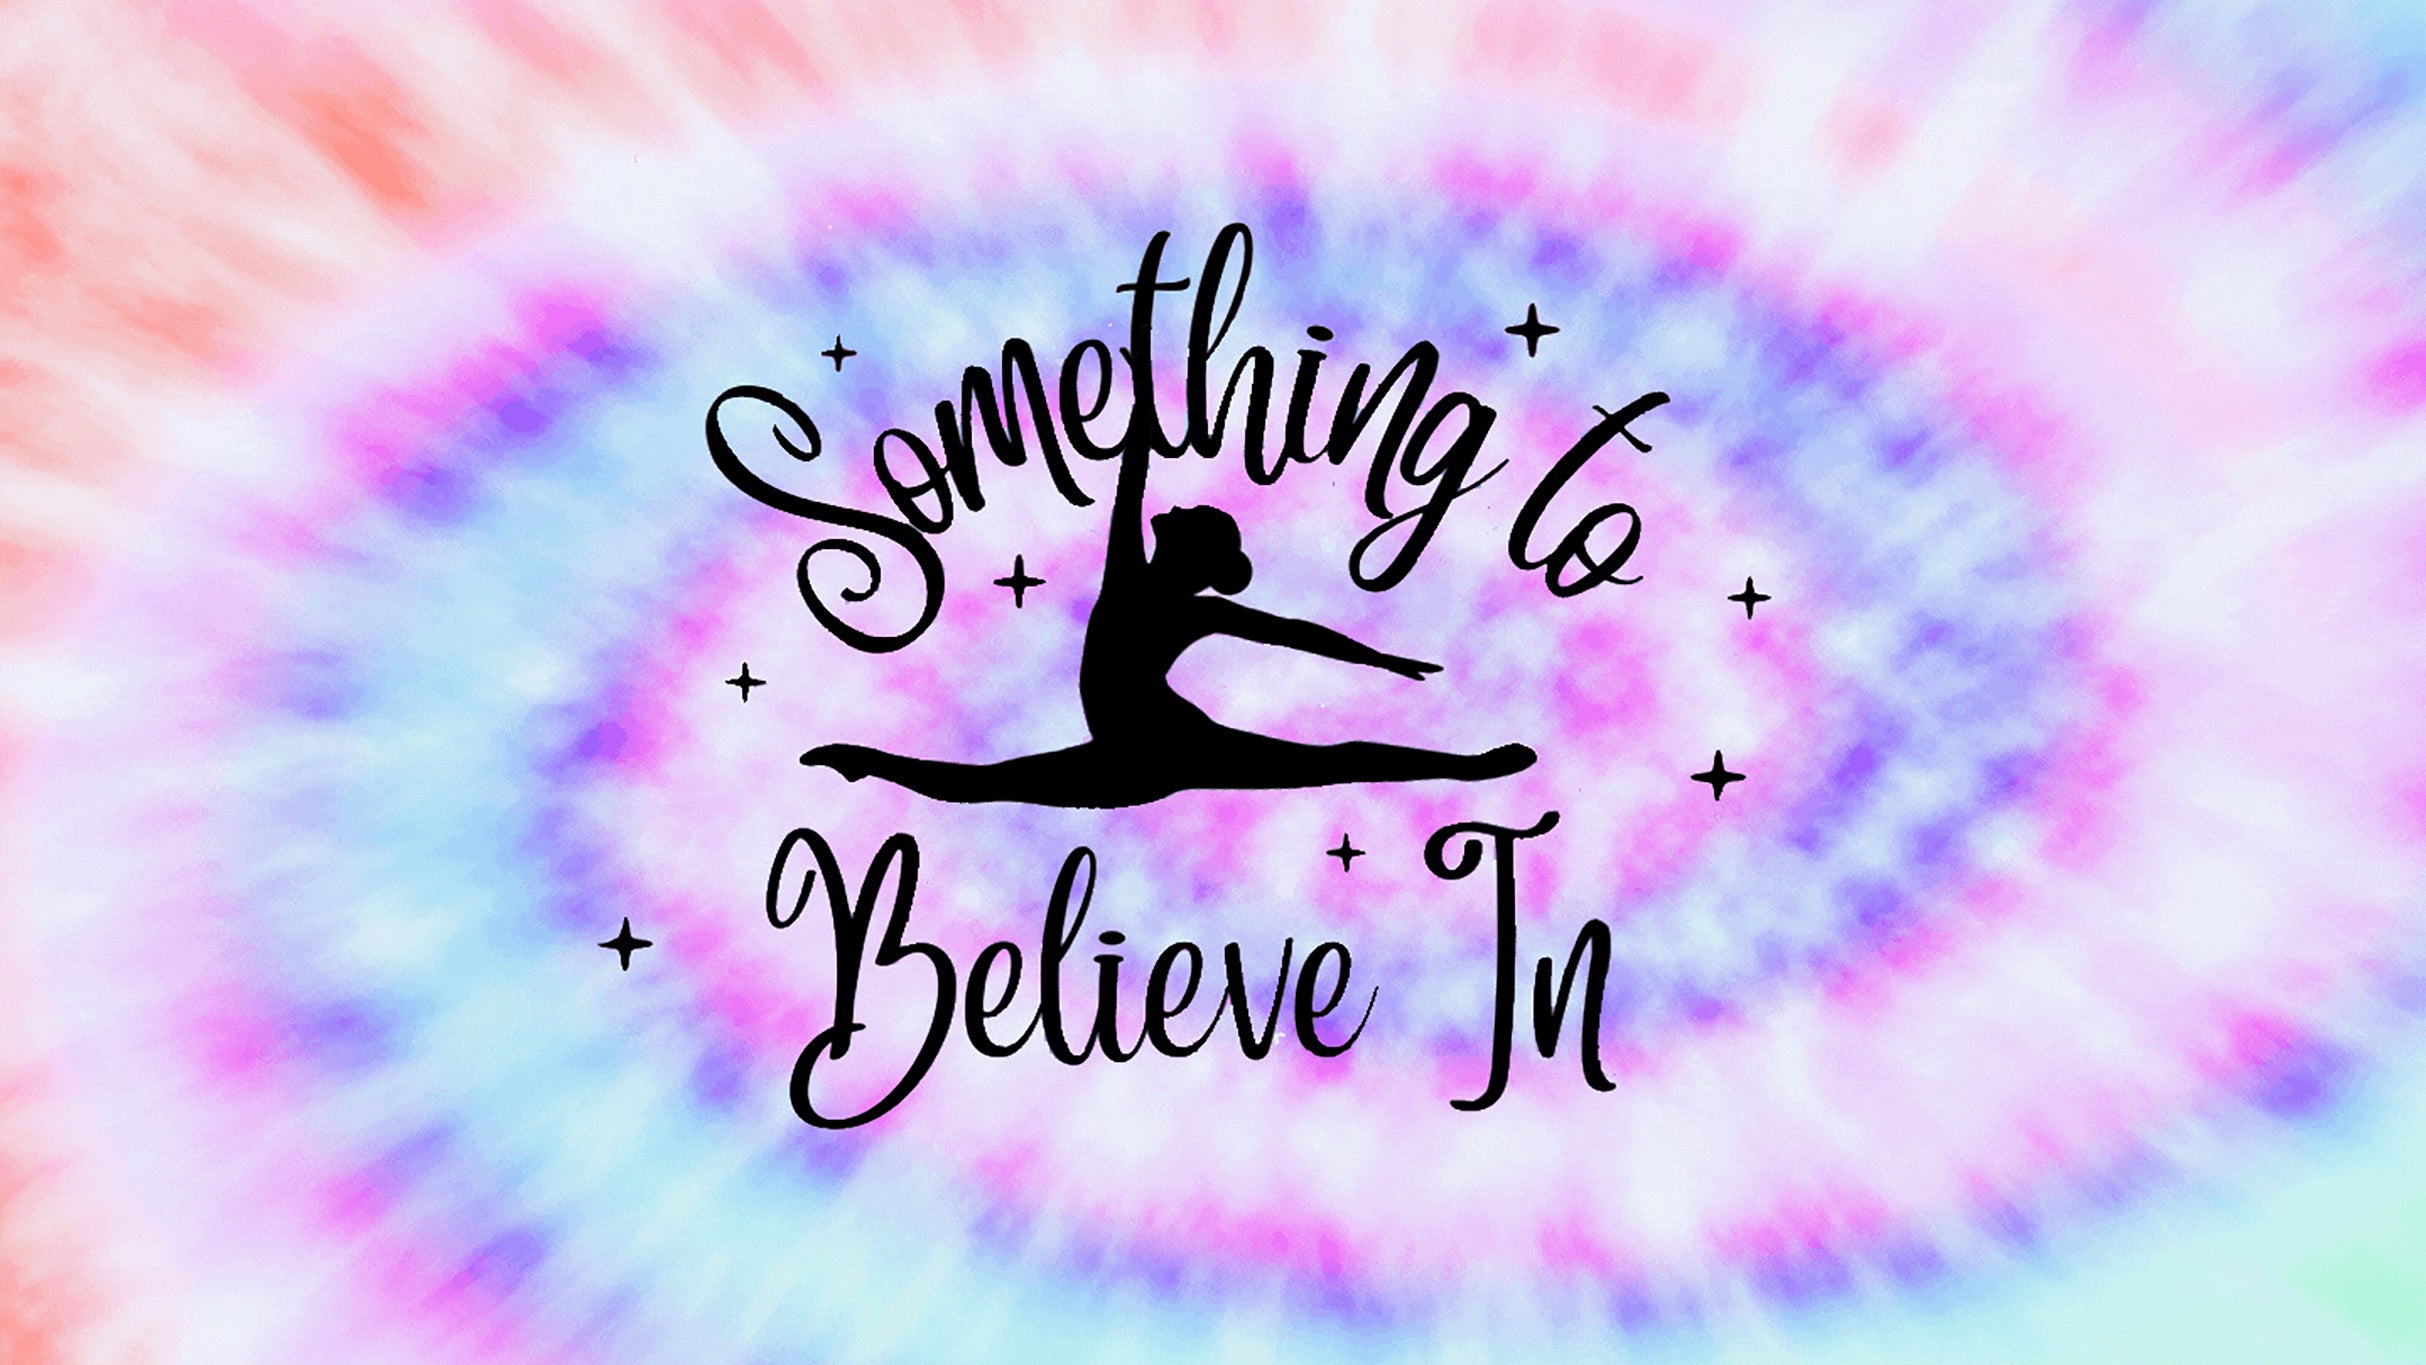 Dance Through The Ages School Show "Something to Believe In"